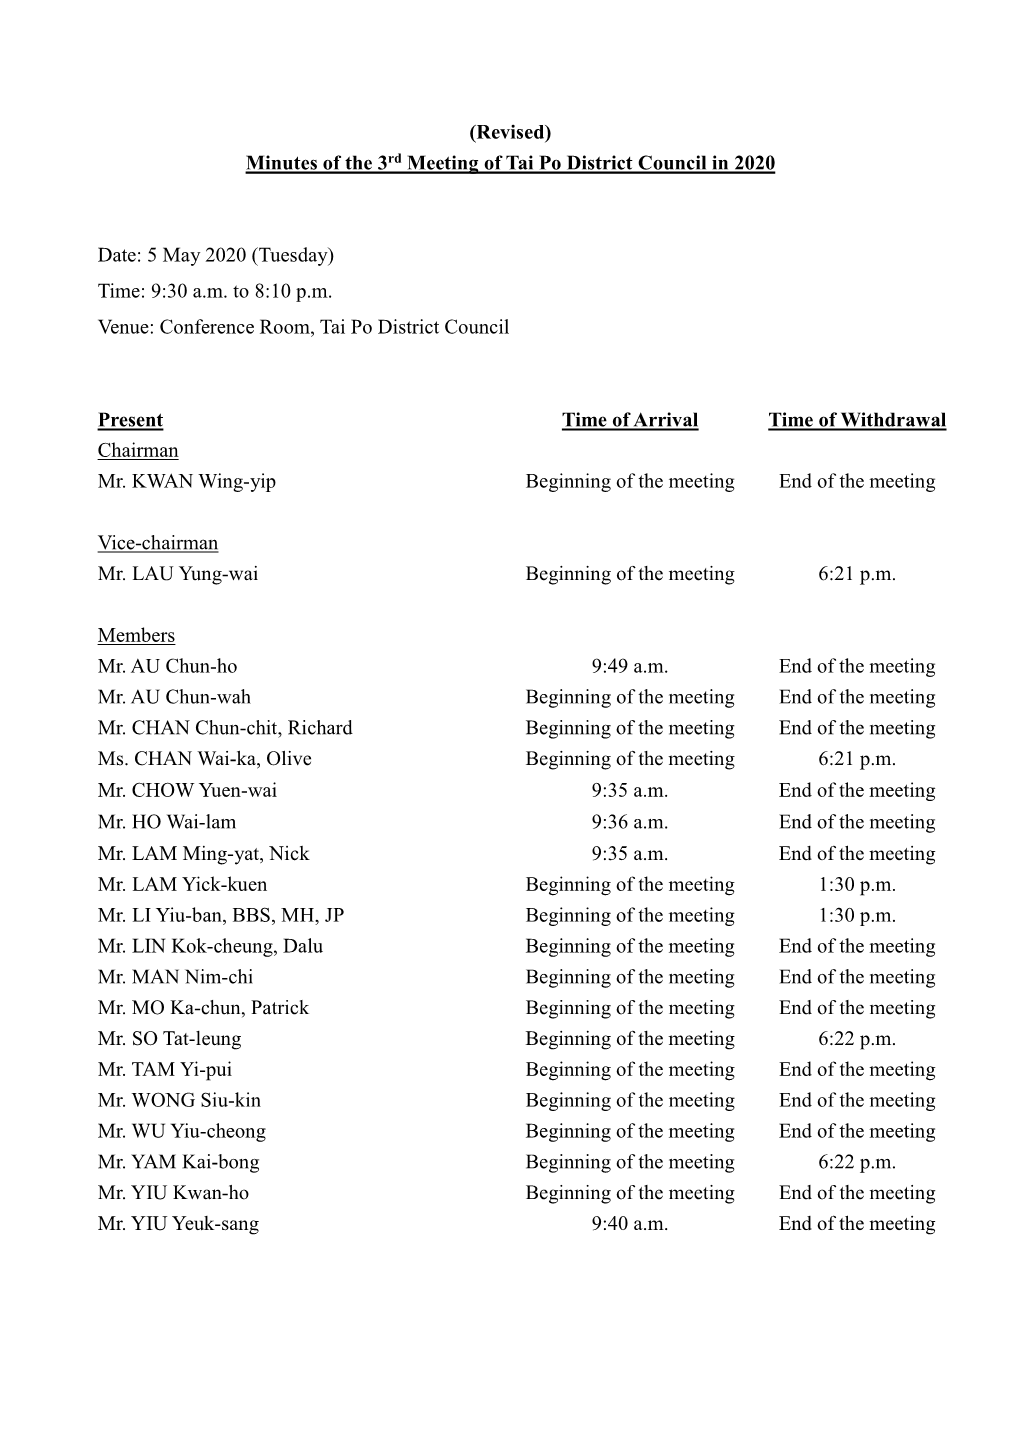 (Revised) Minutes of the 3Rd Meeting of Tai Po District Council in 2020 Date